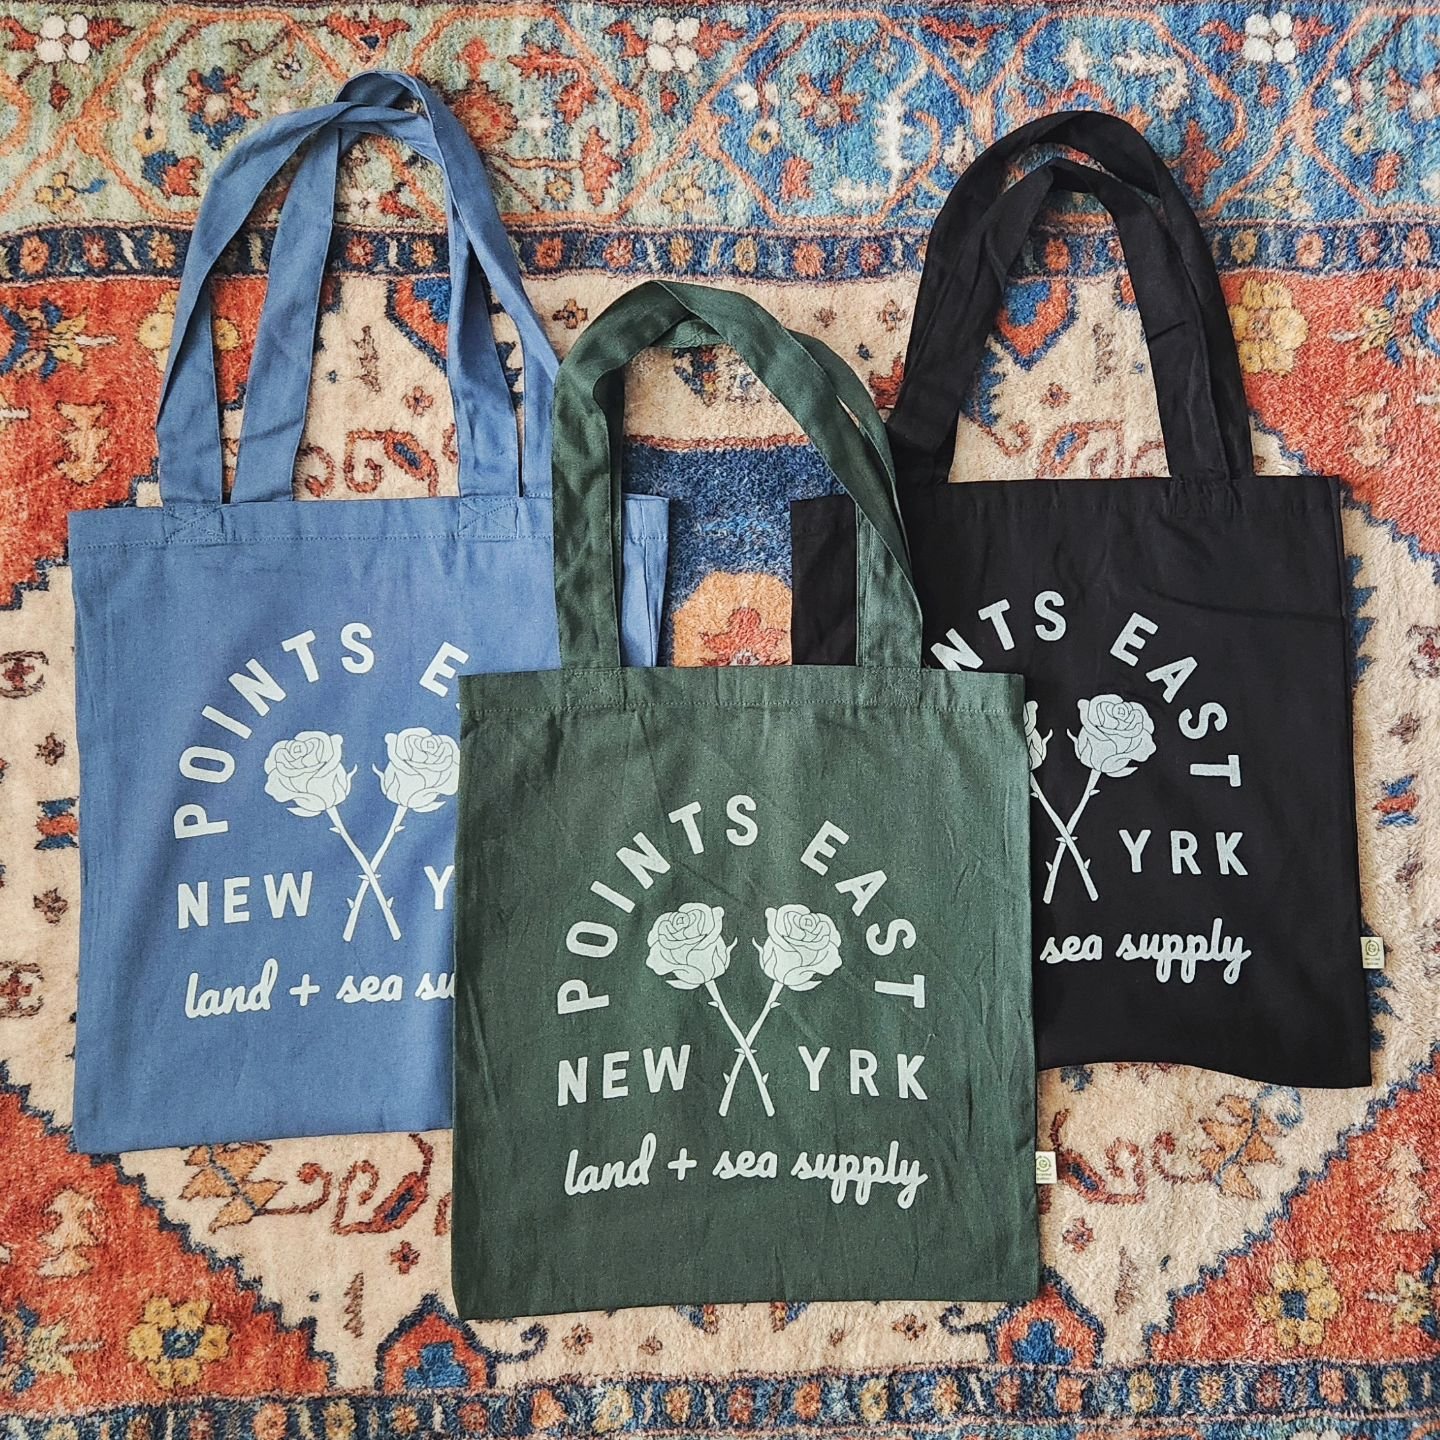 New Reclaim Totes are available now. Made with 100% post-industrial recycled cotton and hand printed with the new fan favorite State Flower design. The perfect every day bag.
.
.
.
.
.
.
.
#newyork #longisland #liny #pointseastsurf #pointseast #madei